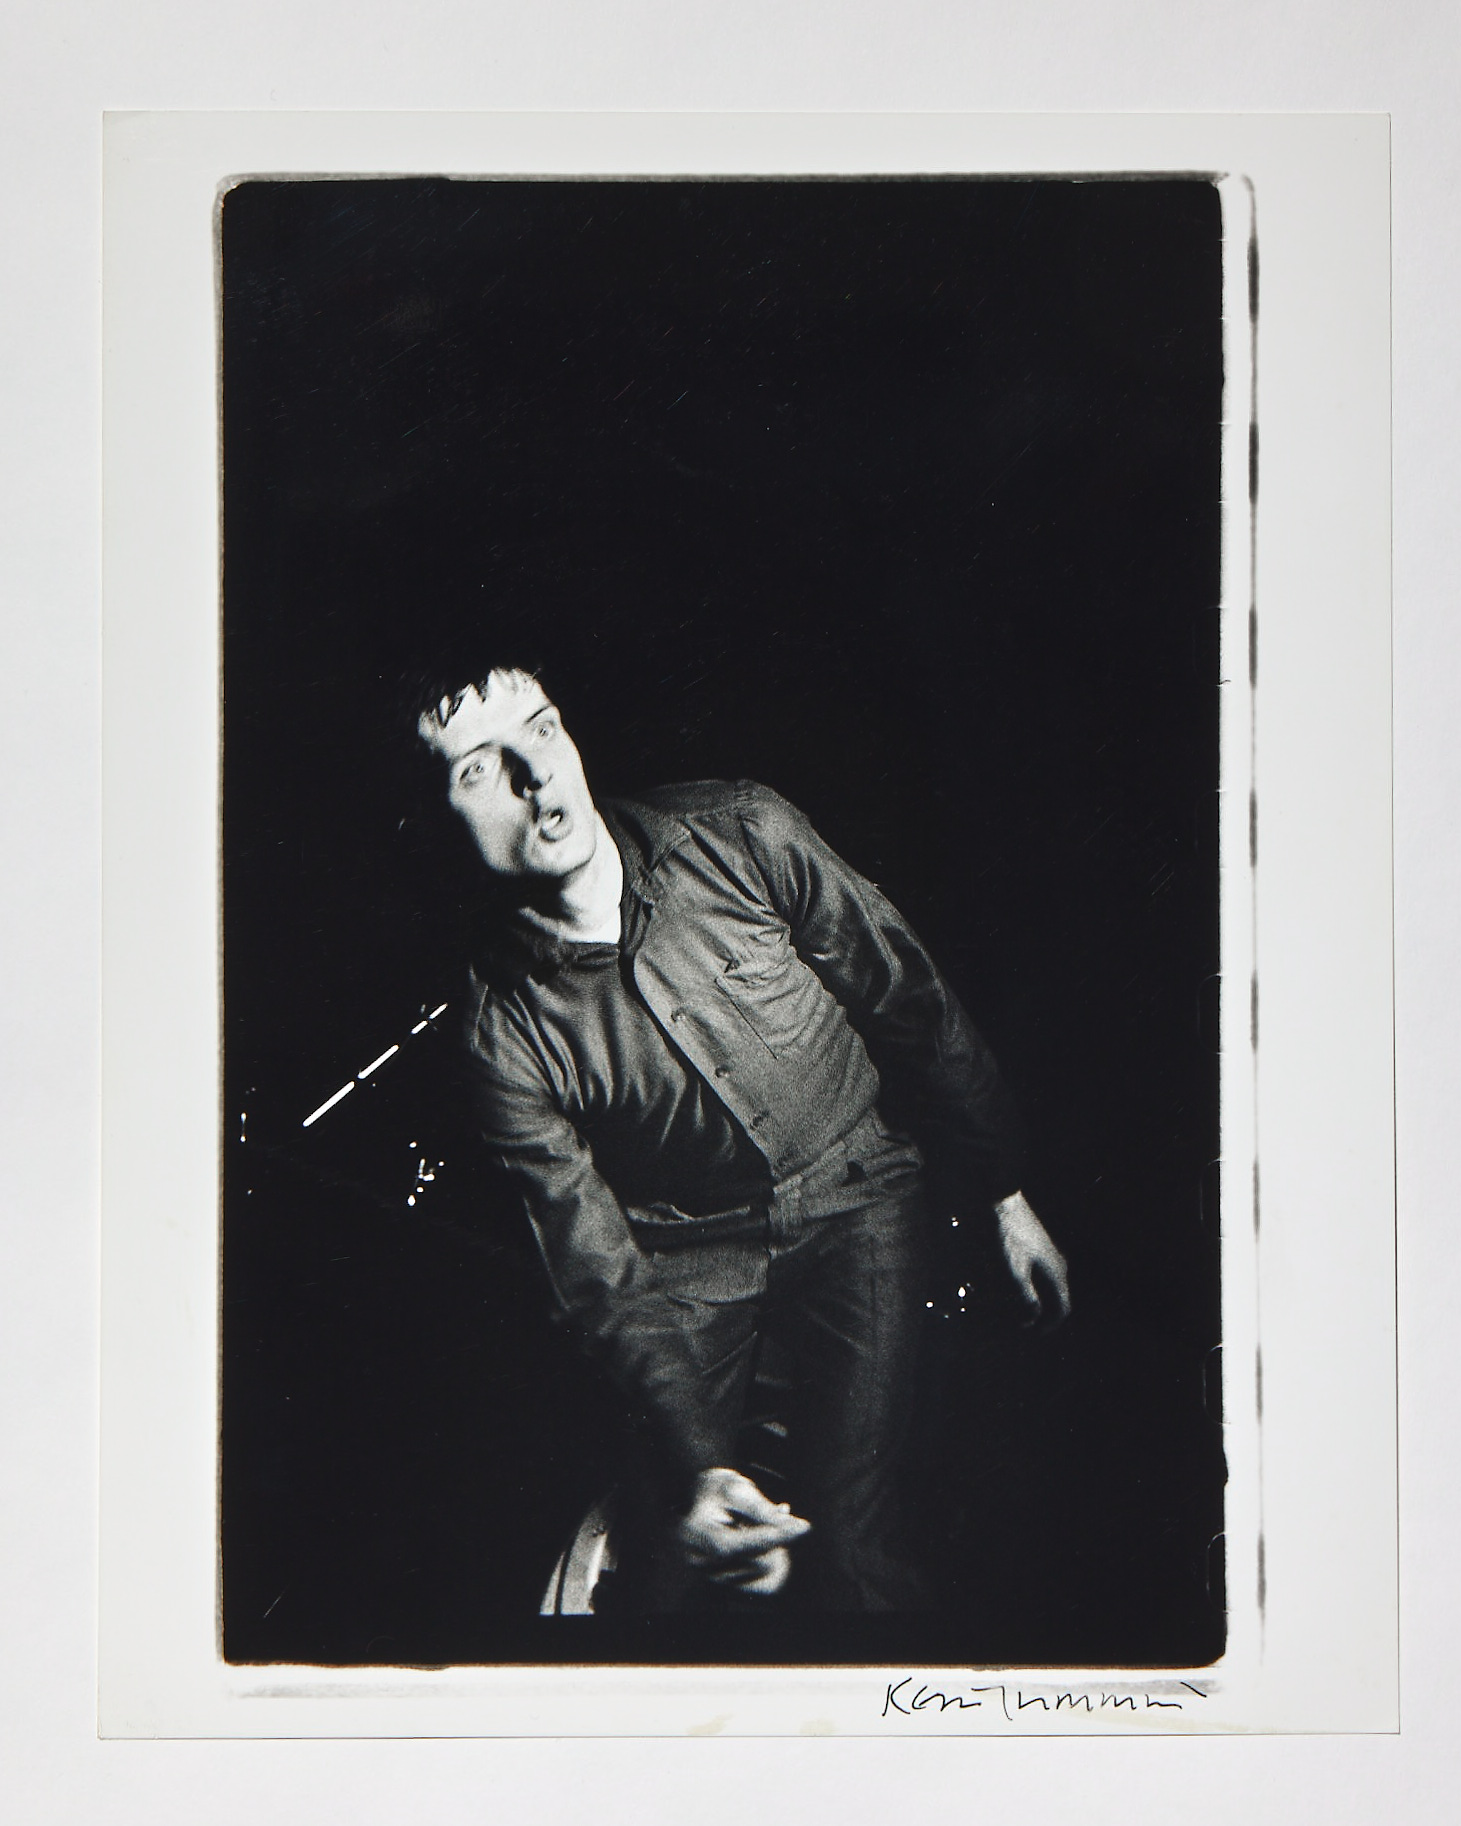 a black and white candid image of ian curtis of joy division on stage by kevin cummins